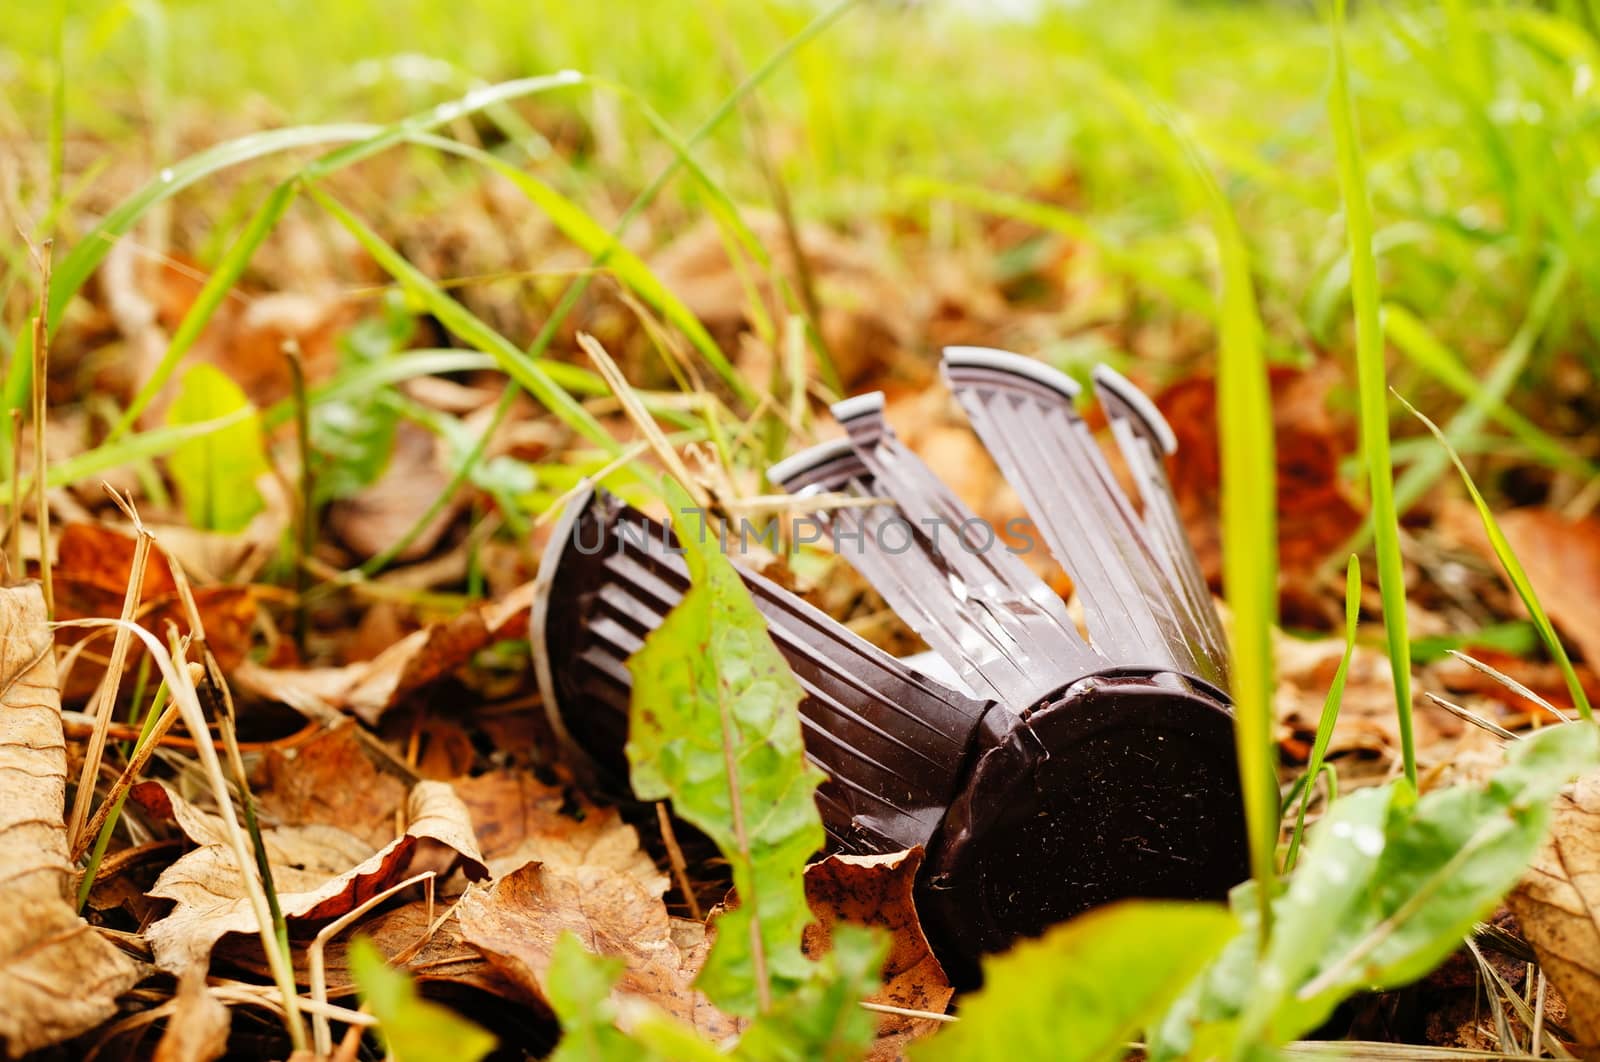 Damaged plastic cup on green grass